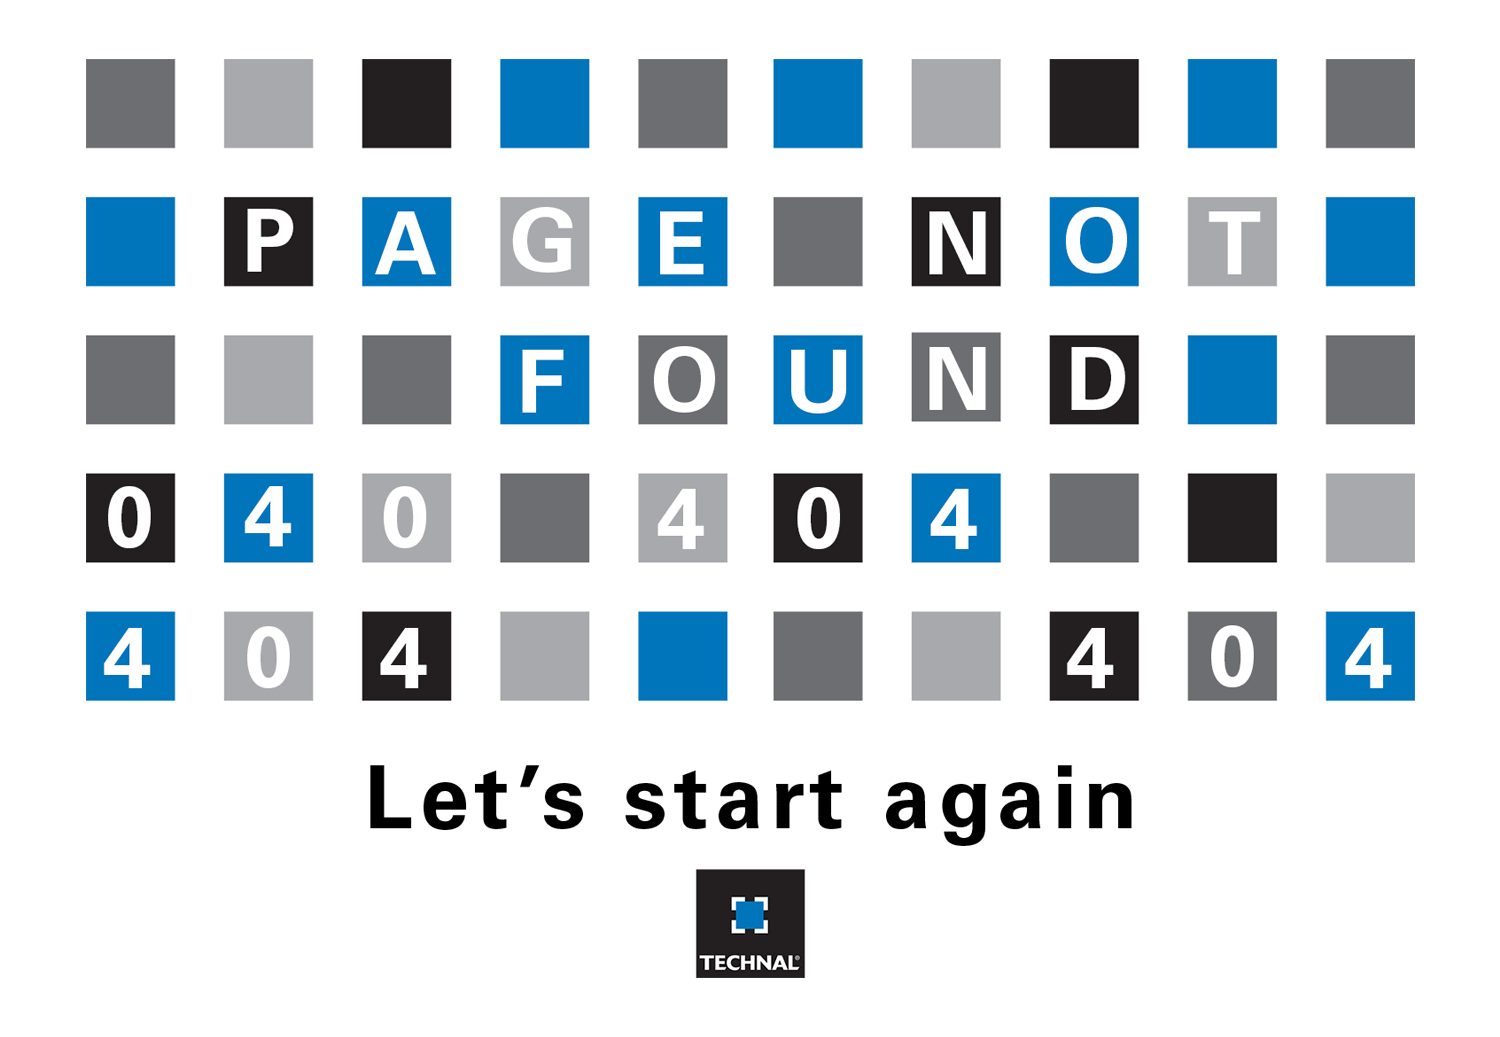 Page not found let's start again